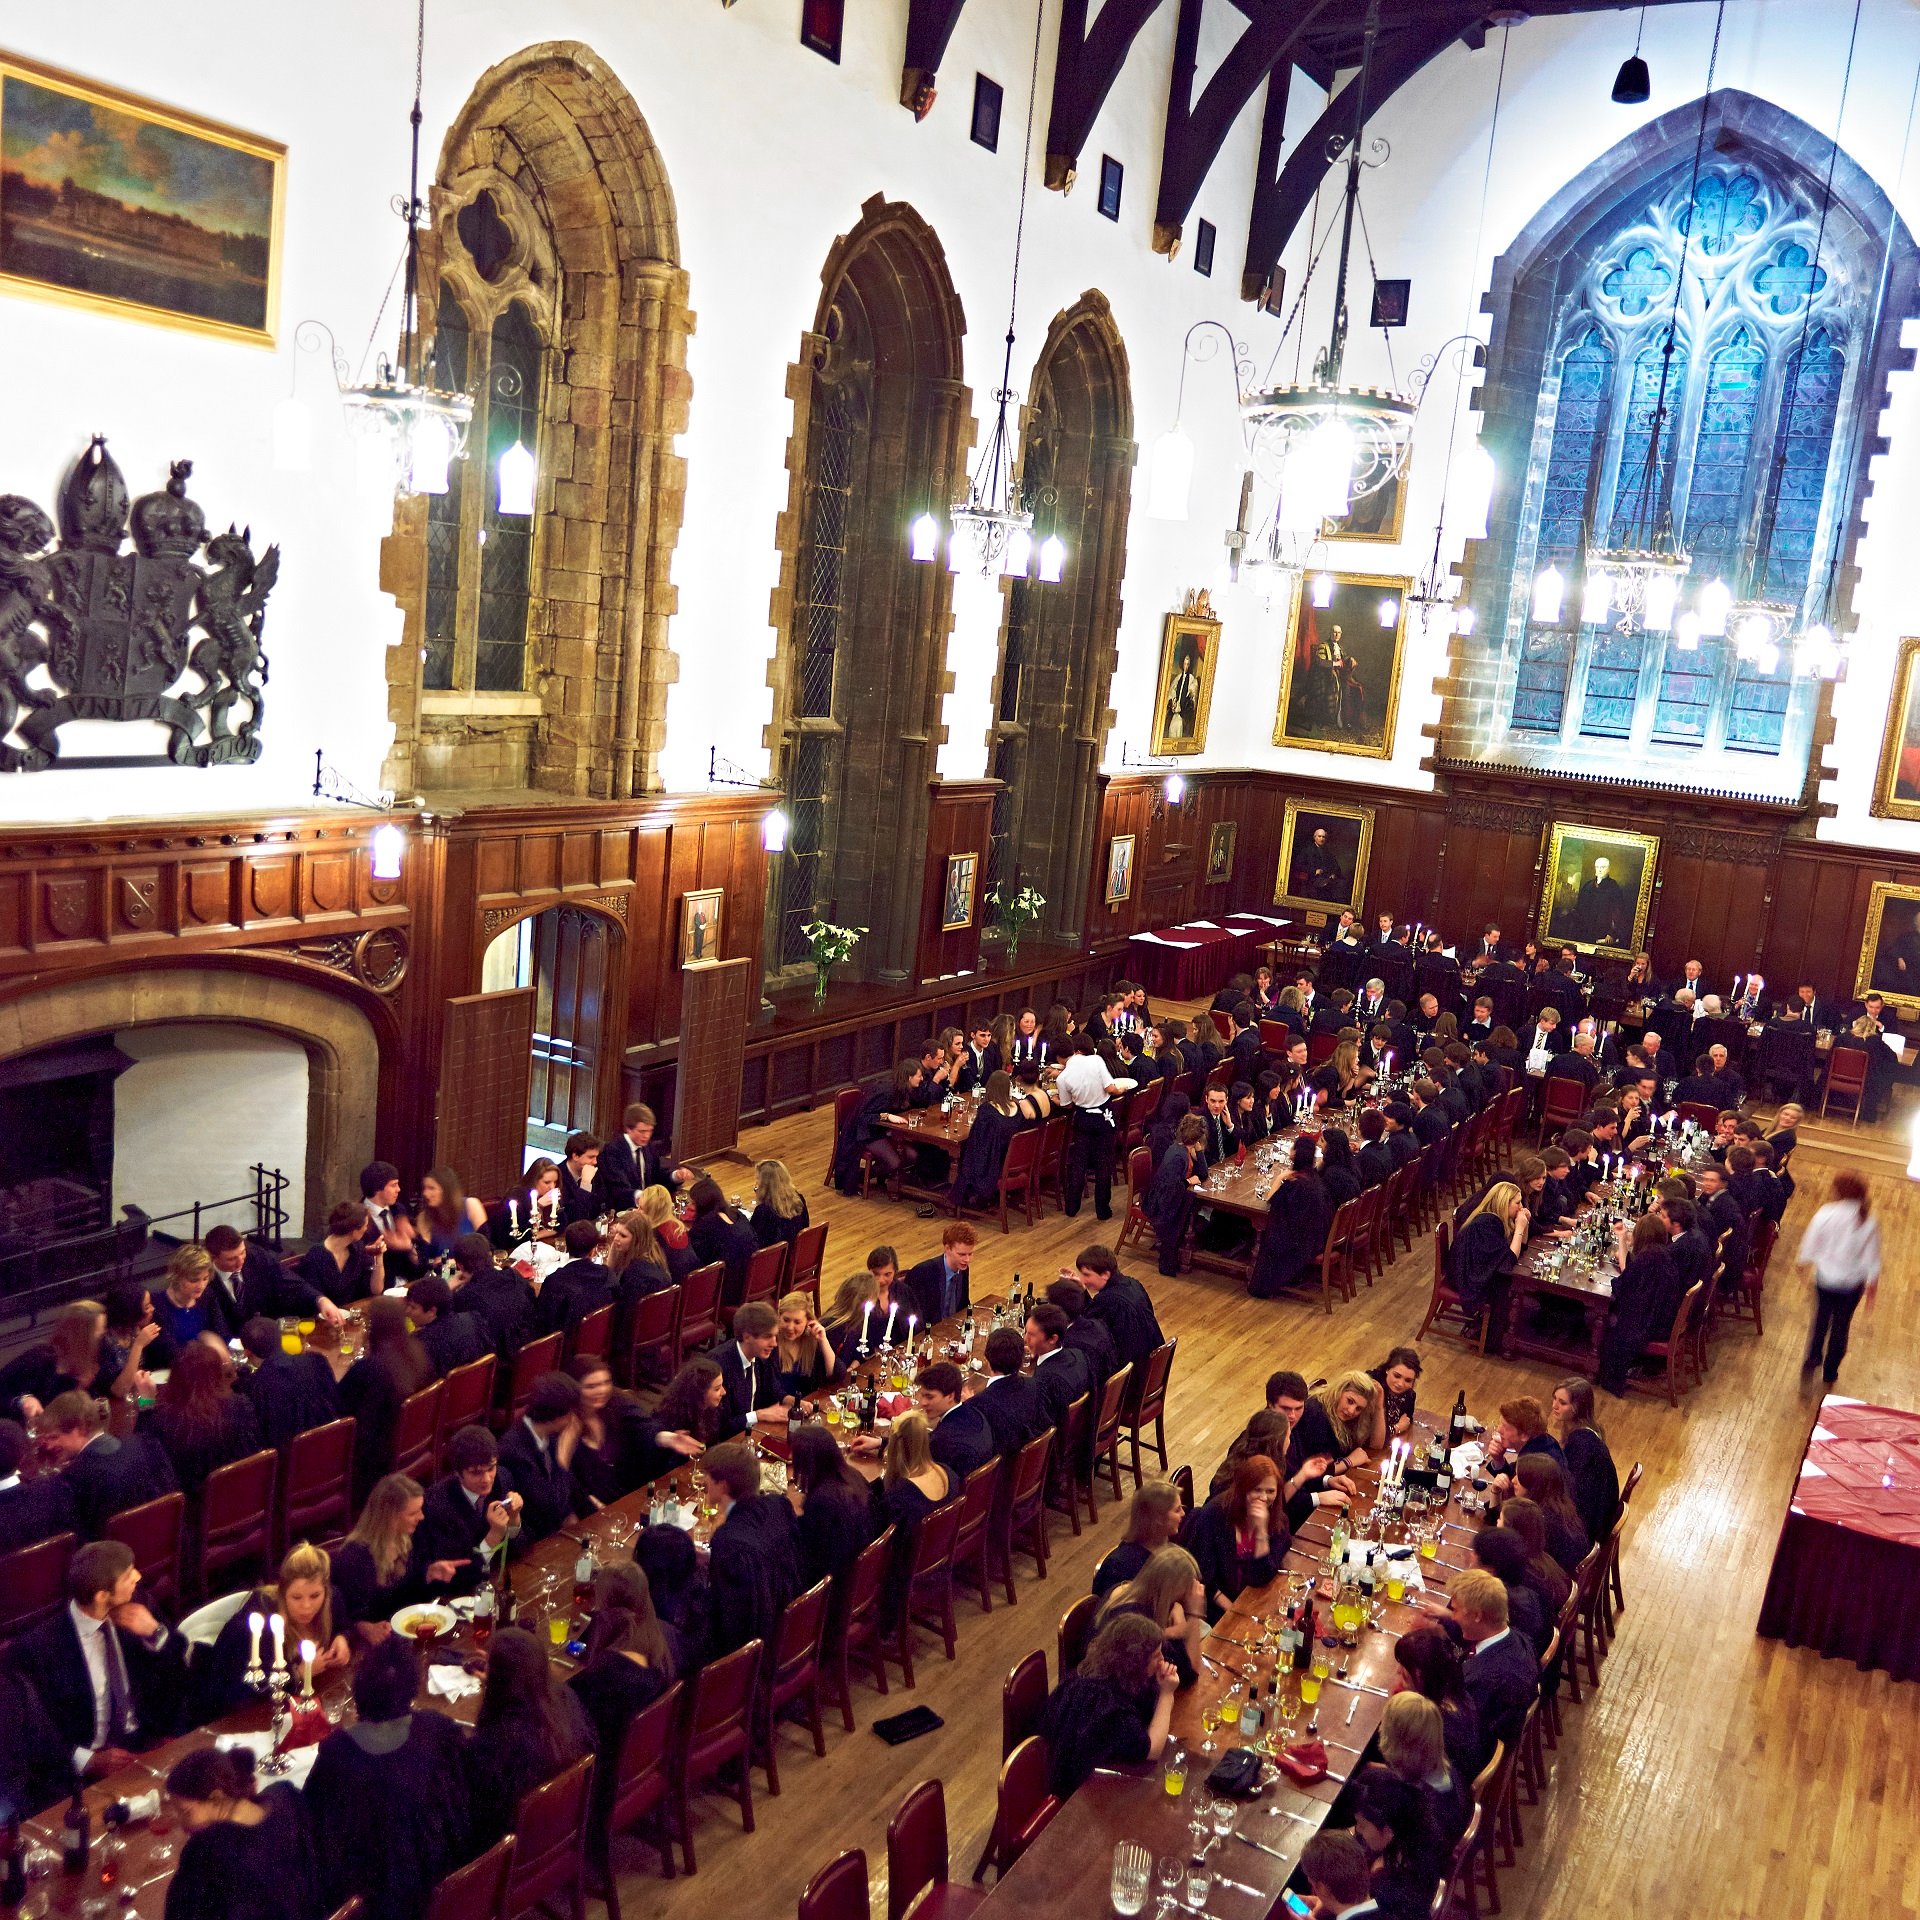 Students sat together on the long tables in the Great Hall.